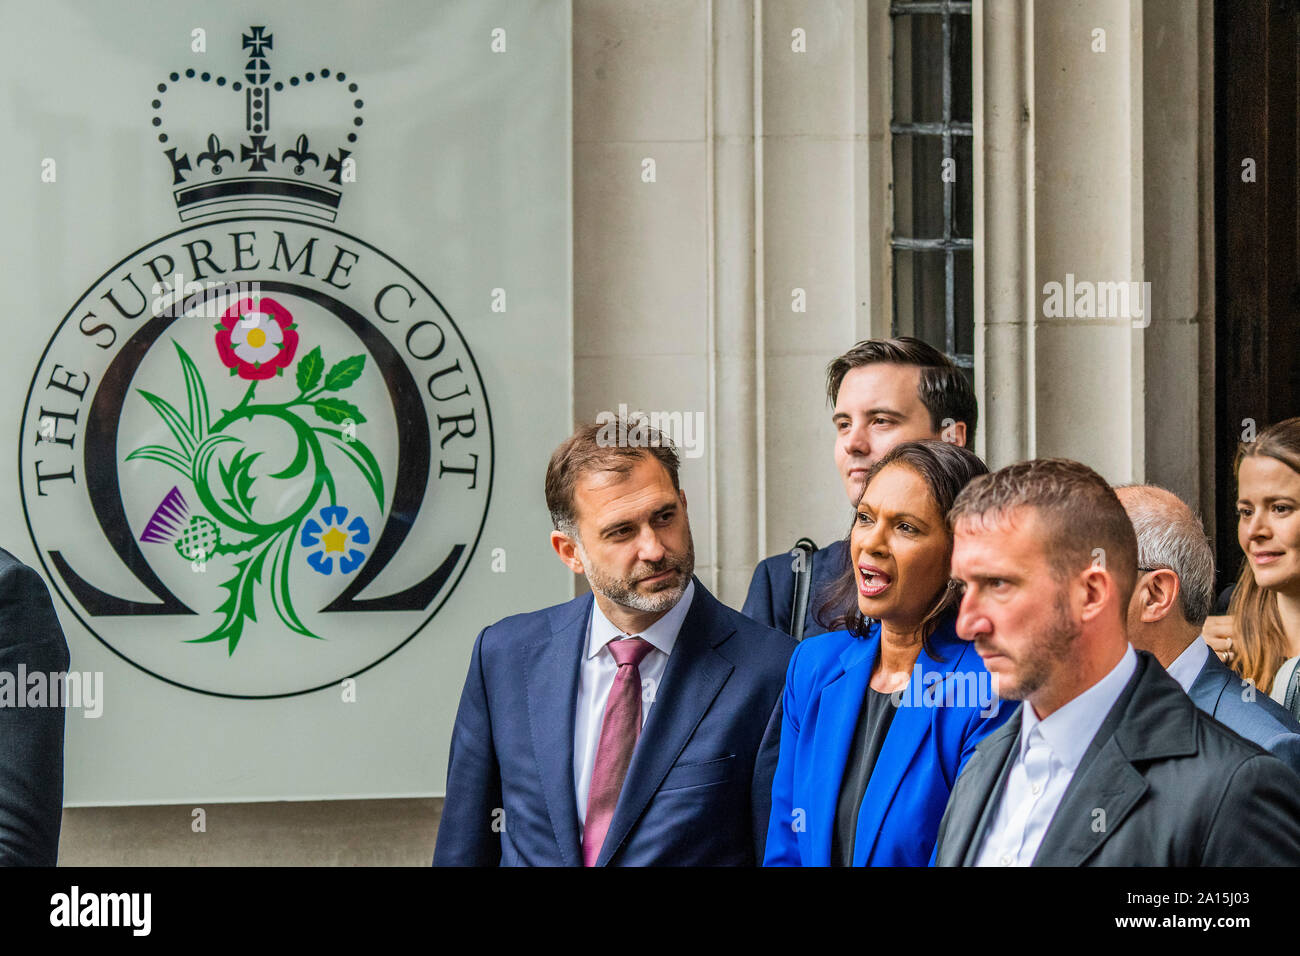 London, UK. 24th Sep 2019. Gina Miller speaks to the press on behalf of the side seeking a recall of parliament - - The supreme court, in Parliament Square, decides against Prime Minister Boris Johnson's decision to suspend parliament. Credit: Guy Bell/Alamy Live News Stock Photo